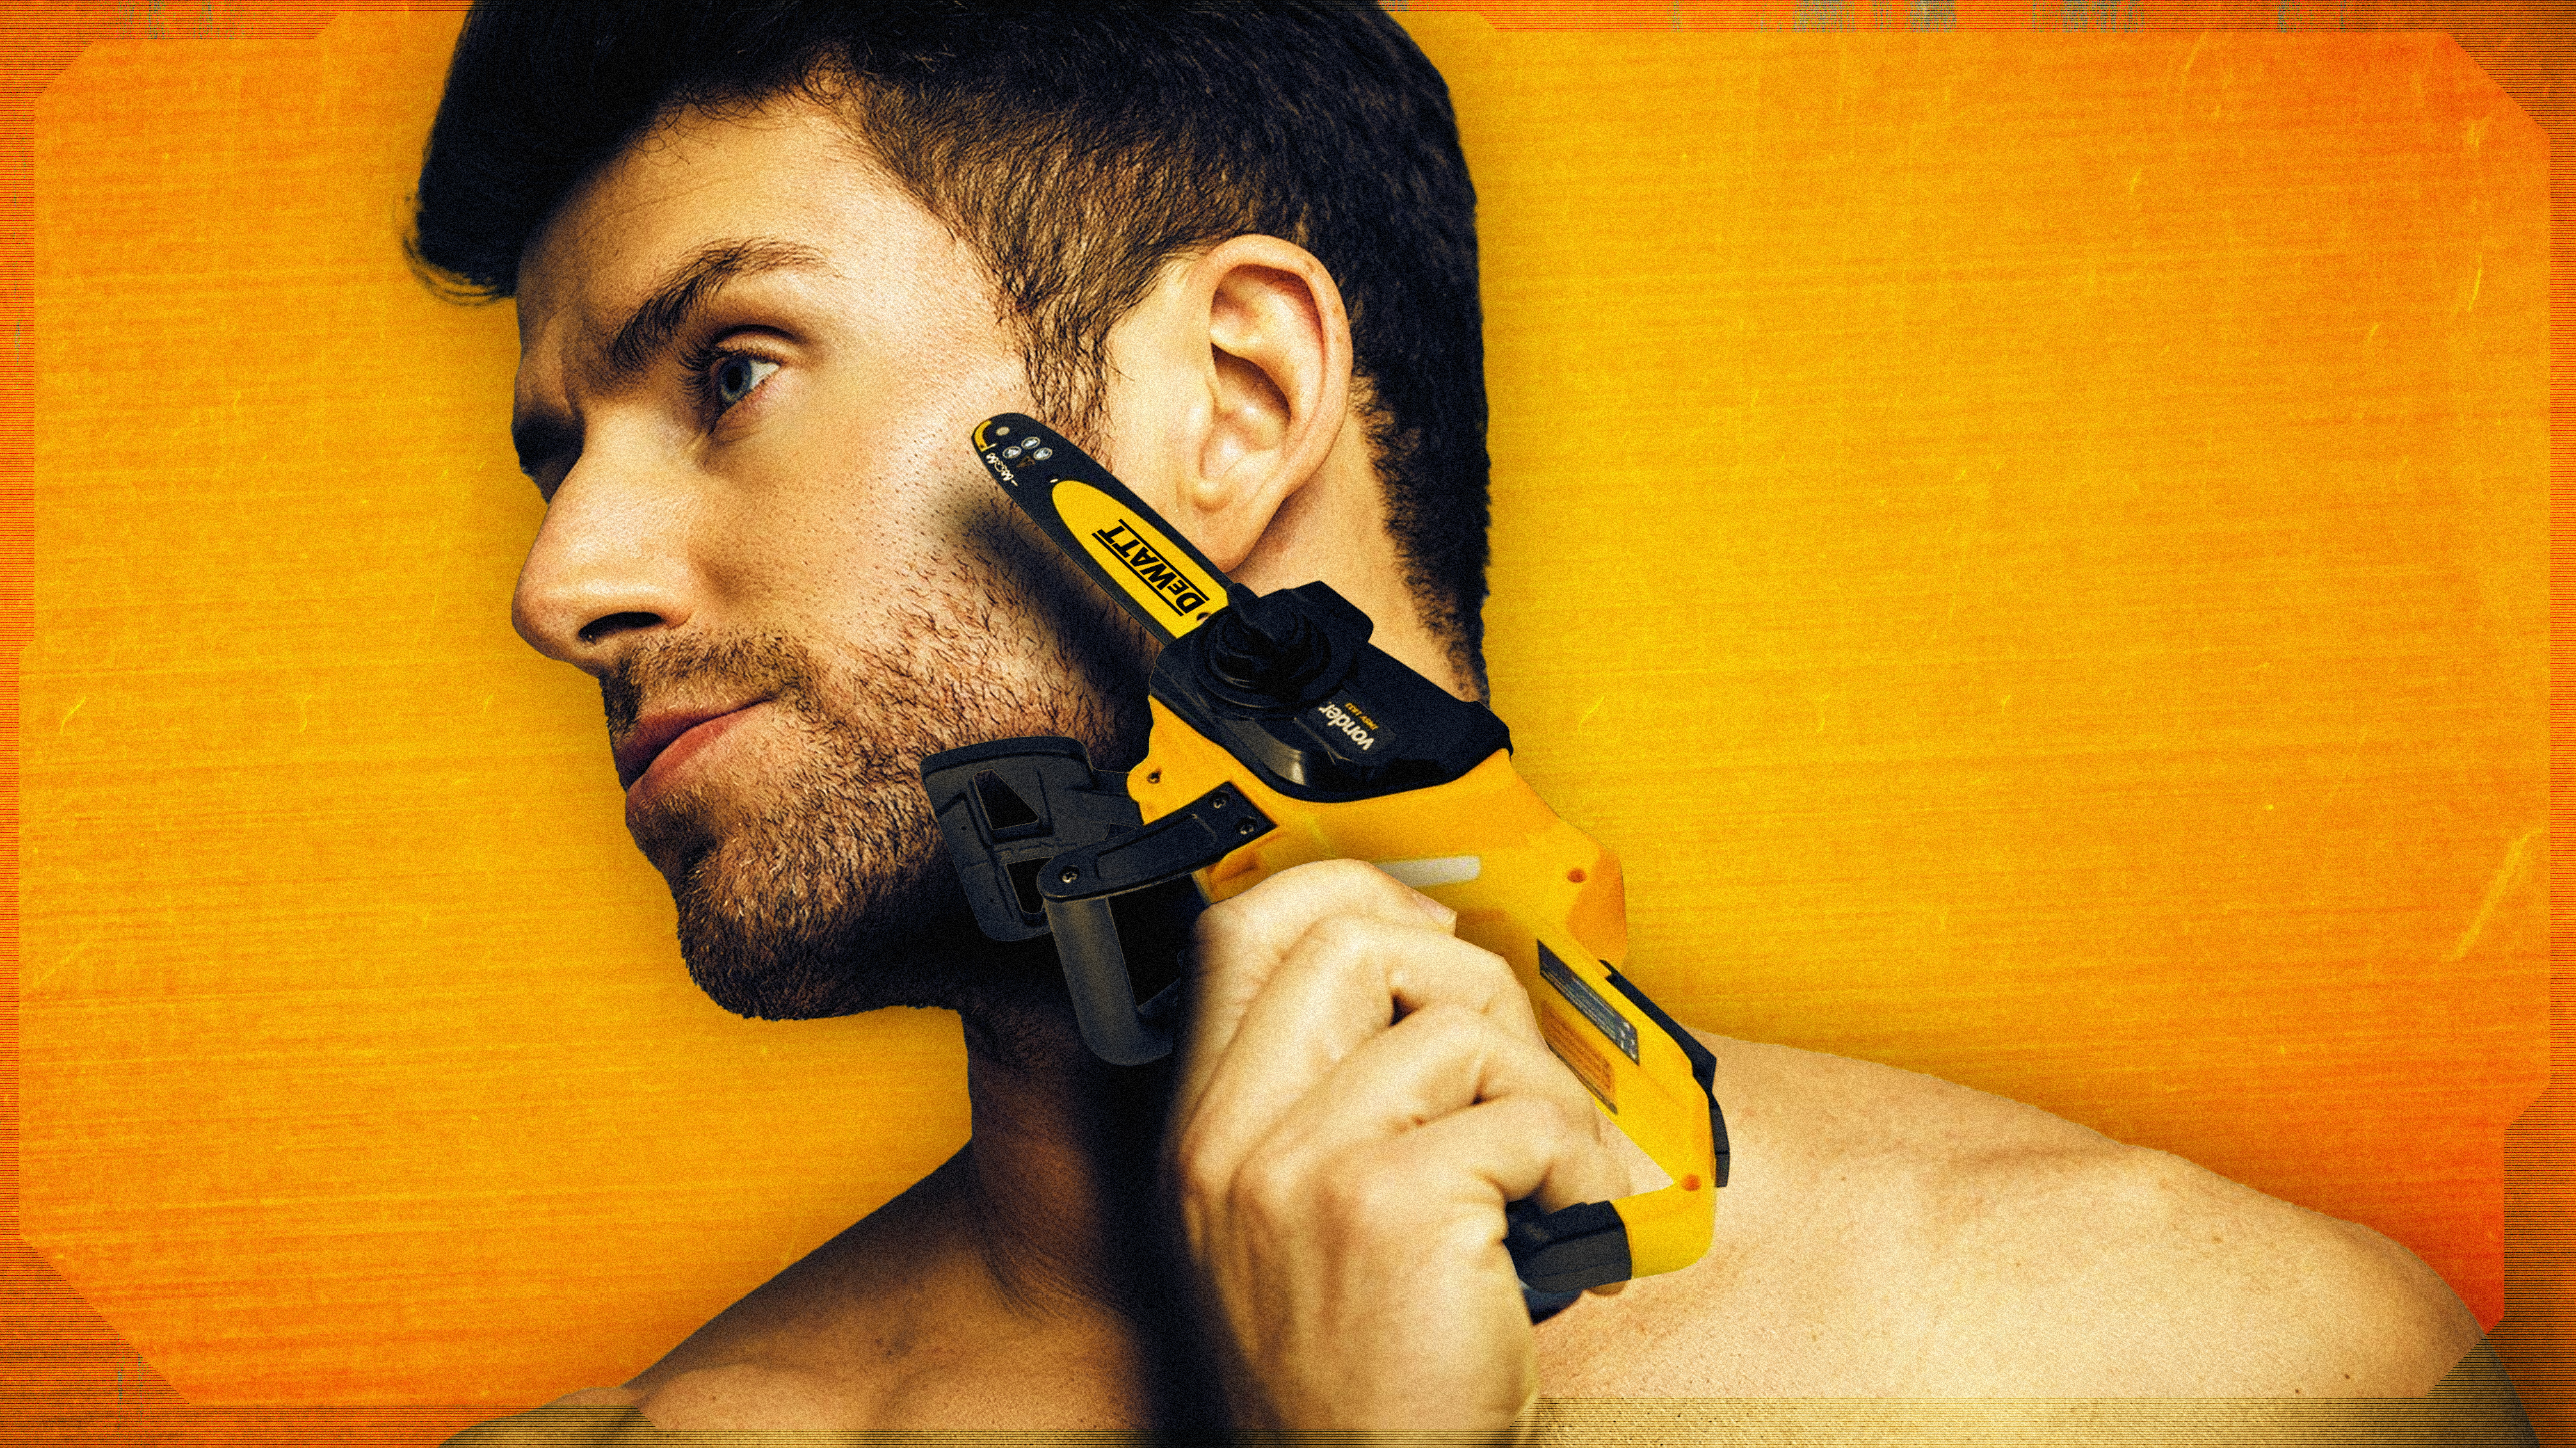 People 4024x2262 photoshopped poster advertisements yellow yellow background technology tools chainsaws artwork digital art photography shaver humor